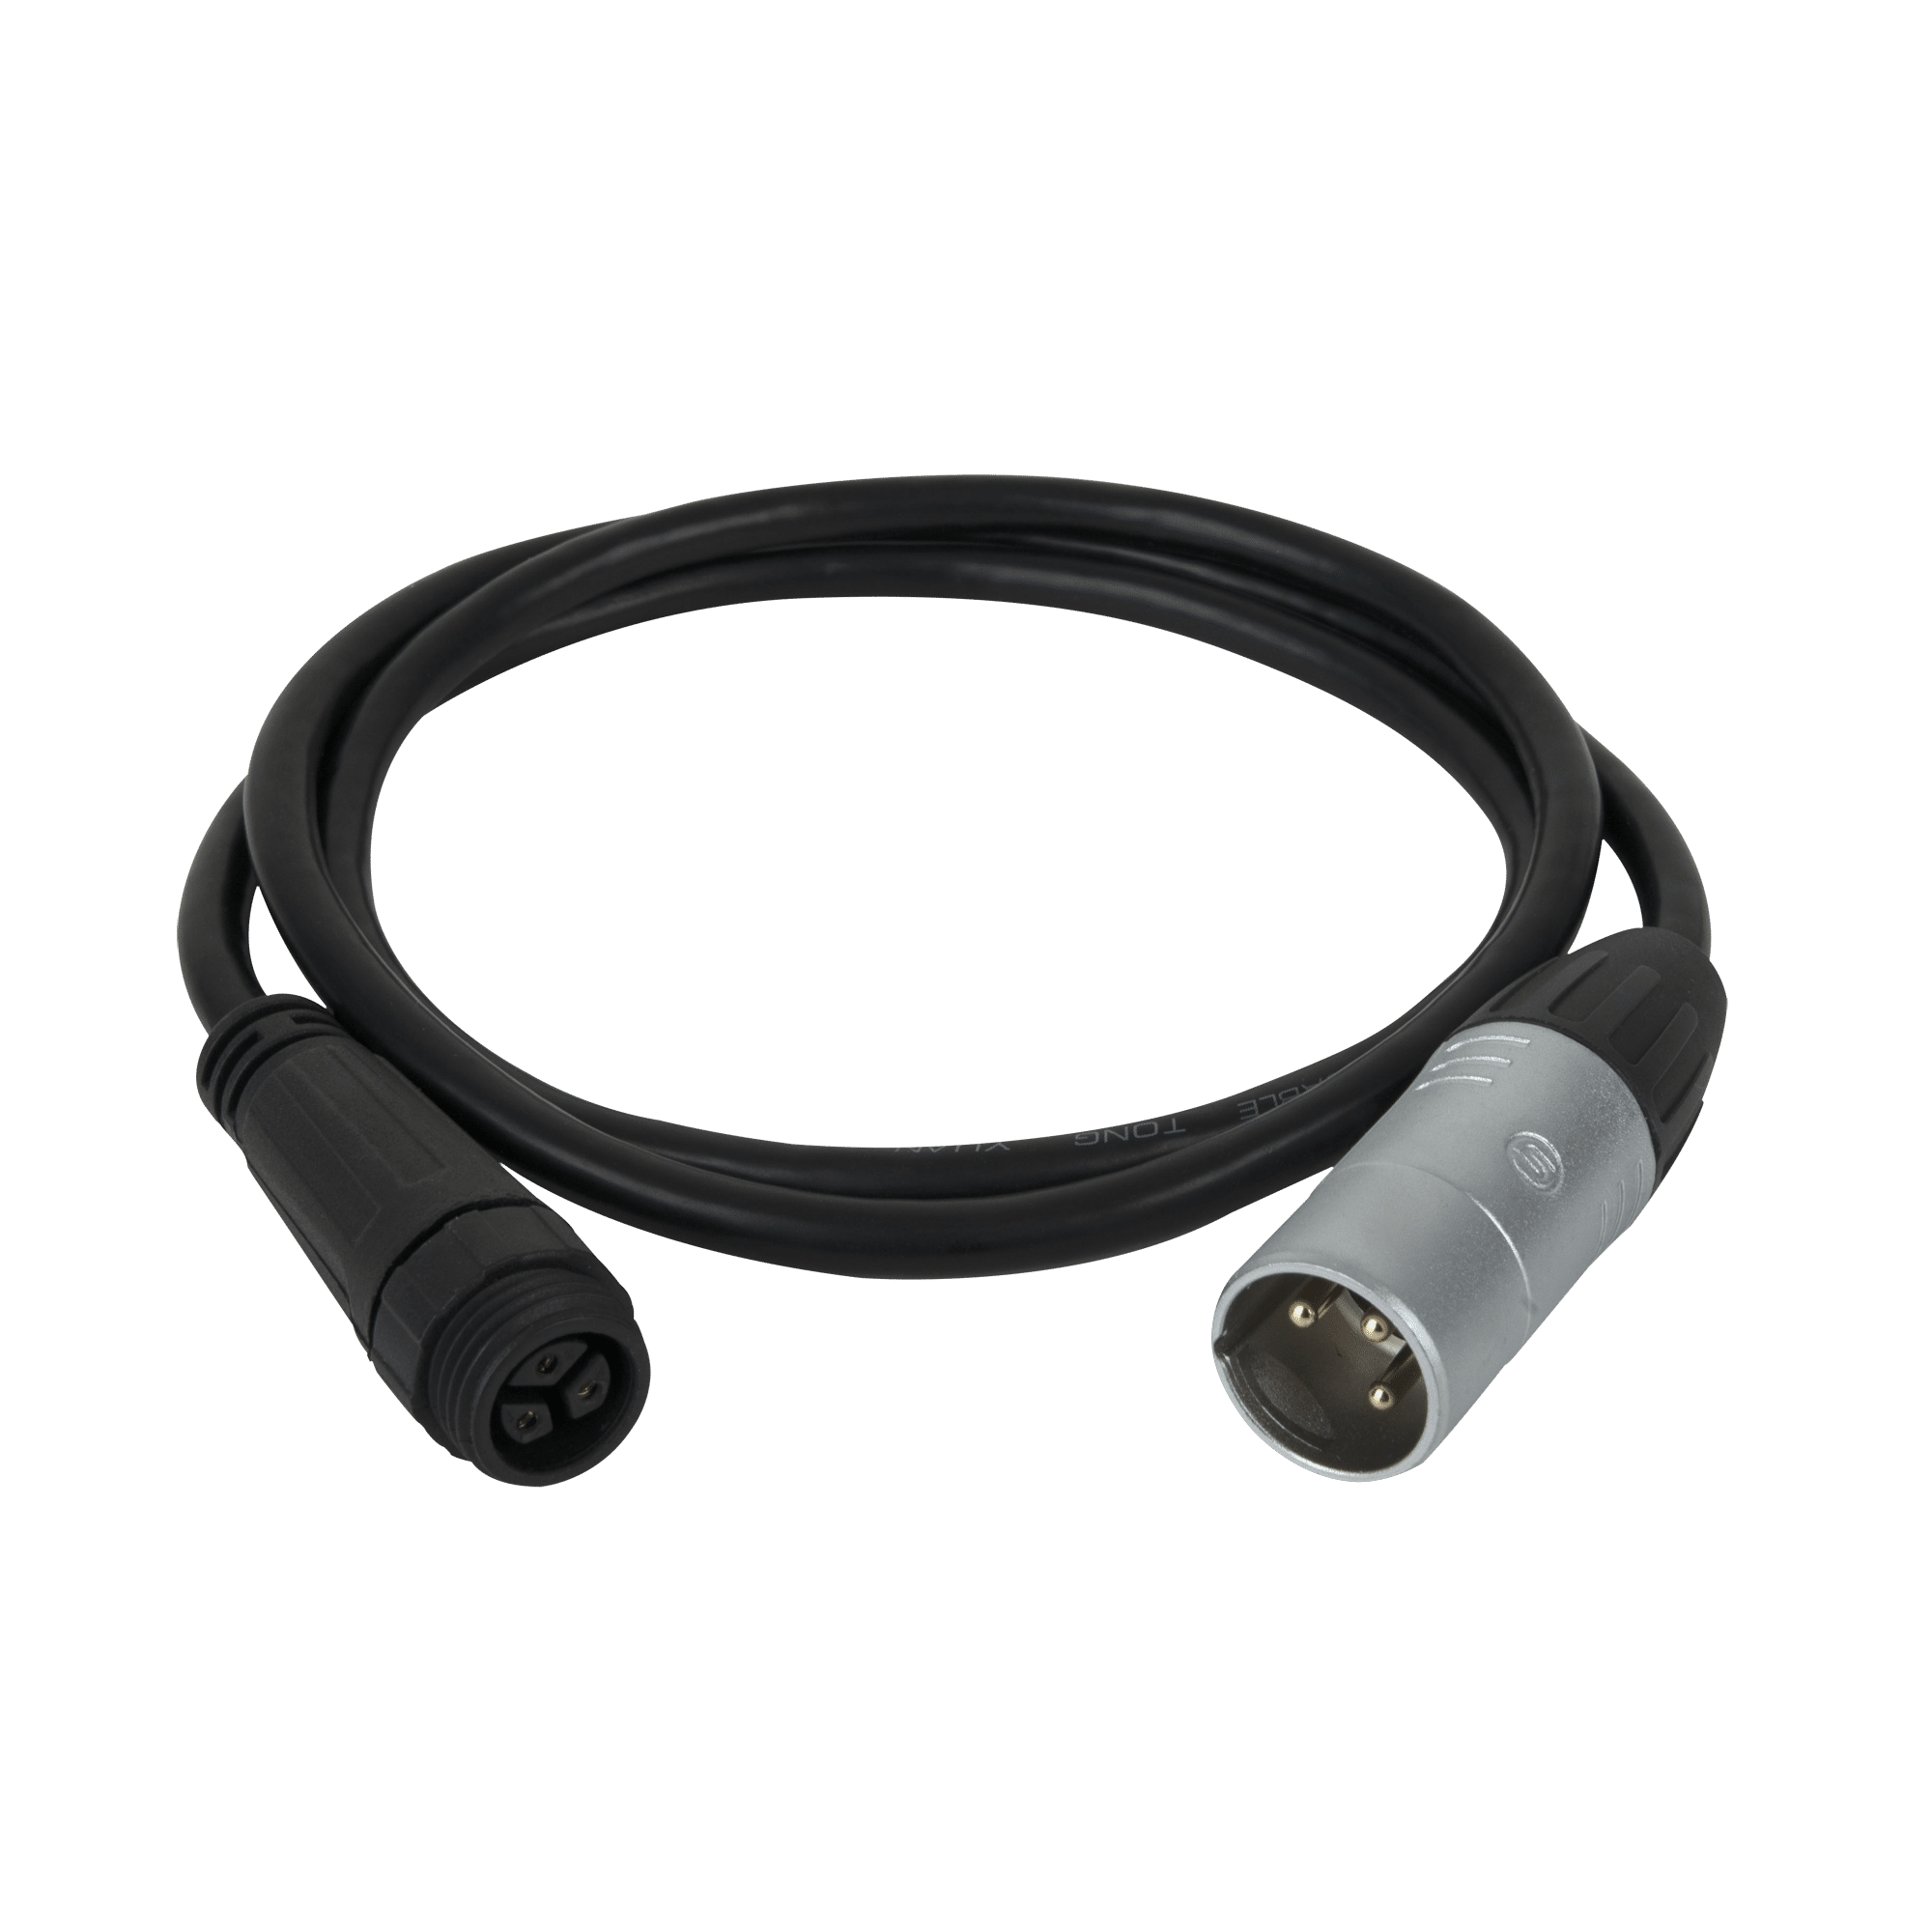 XLR Adapter Cable for Image Spot - Onlinediscowinkel.nl